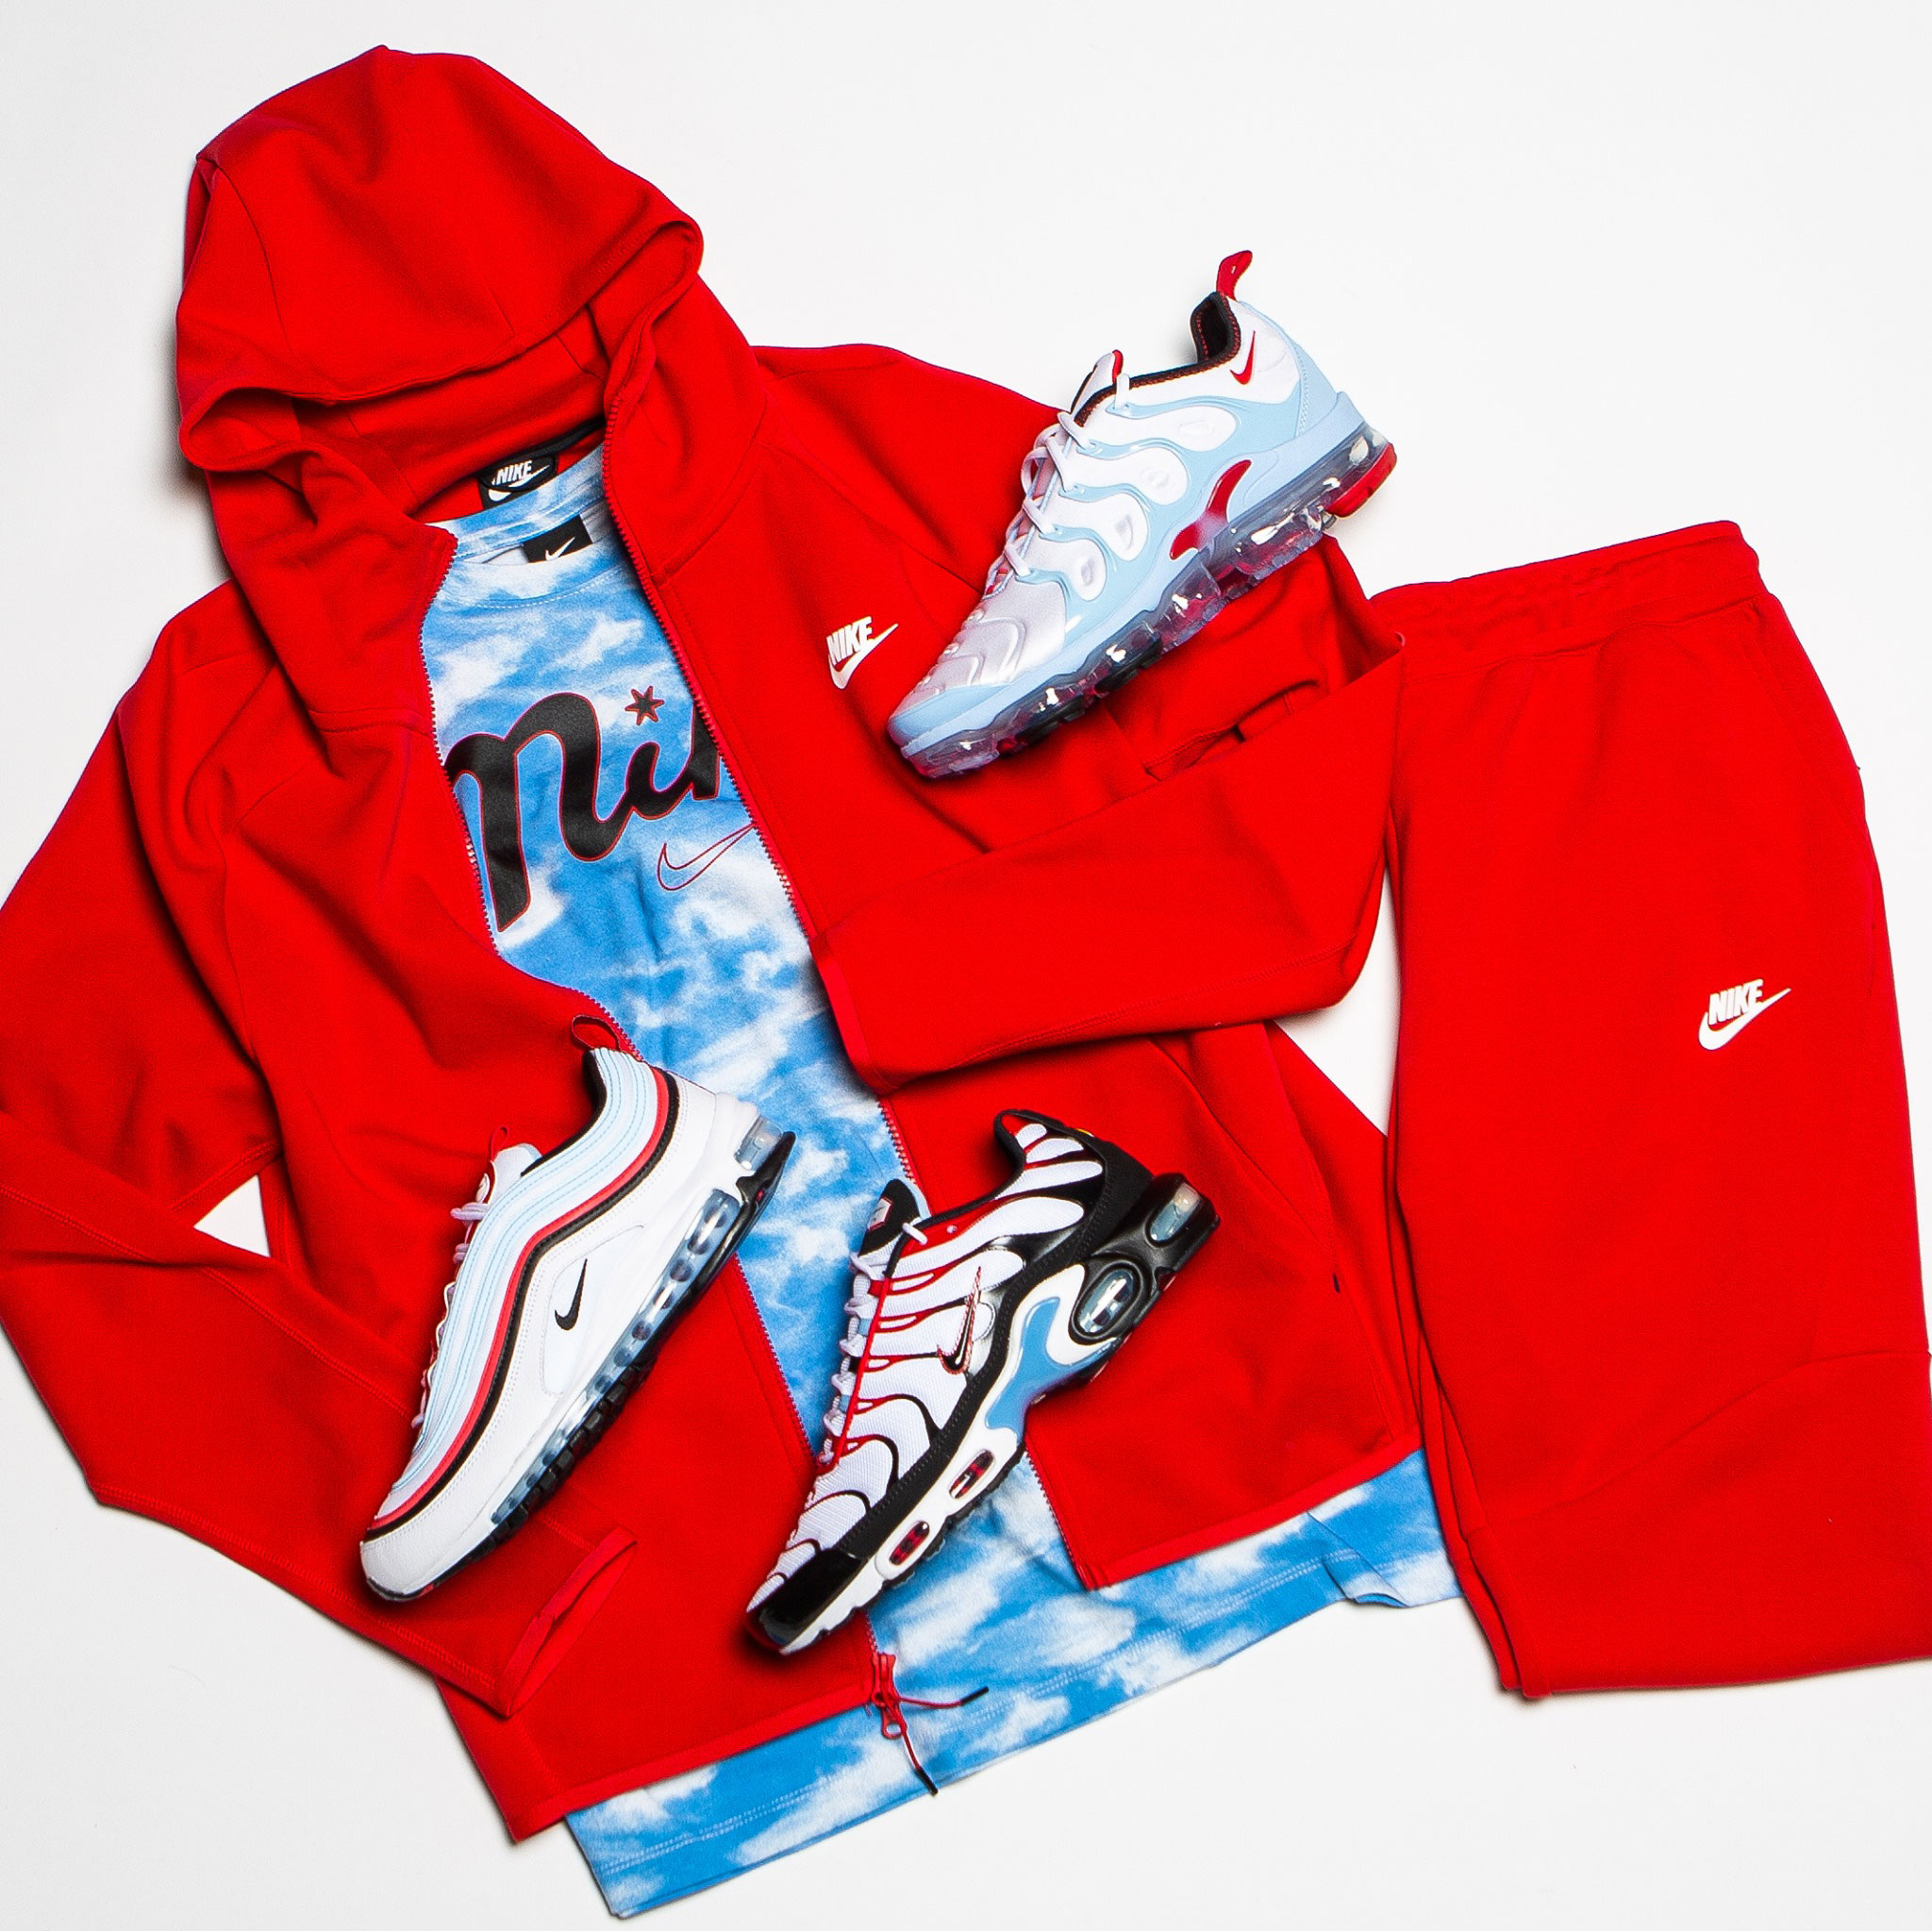 nike air joggers red